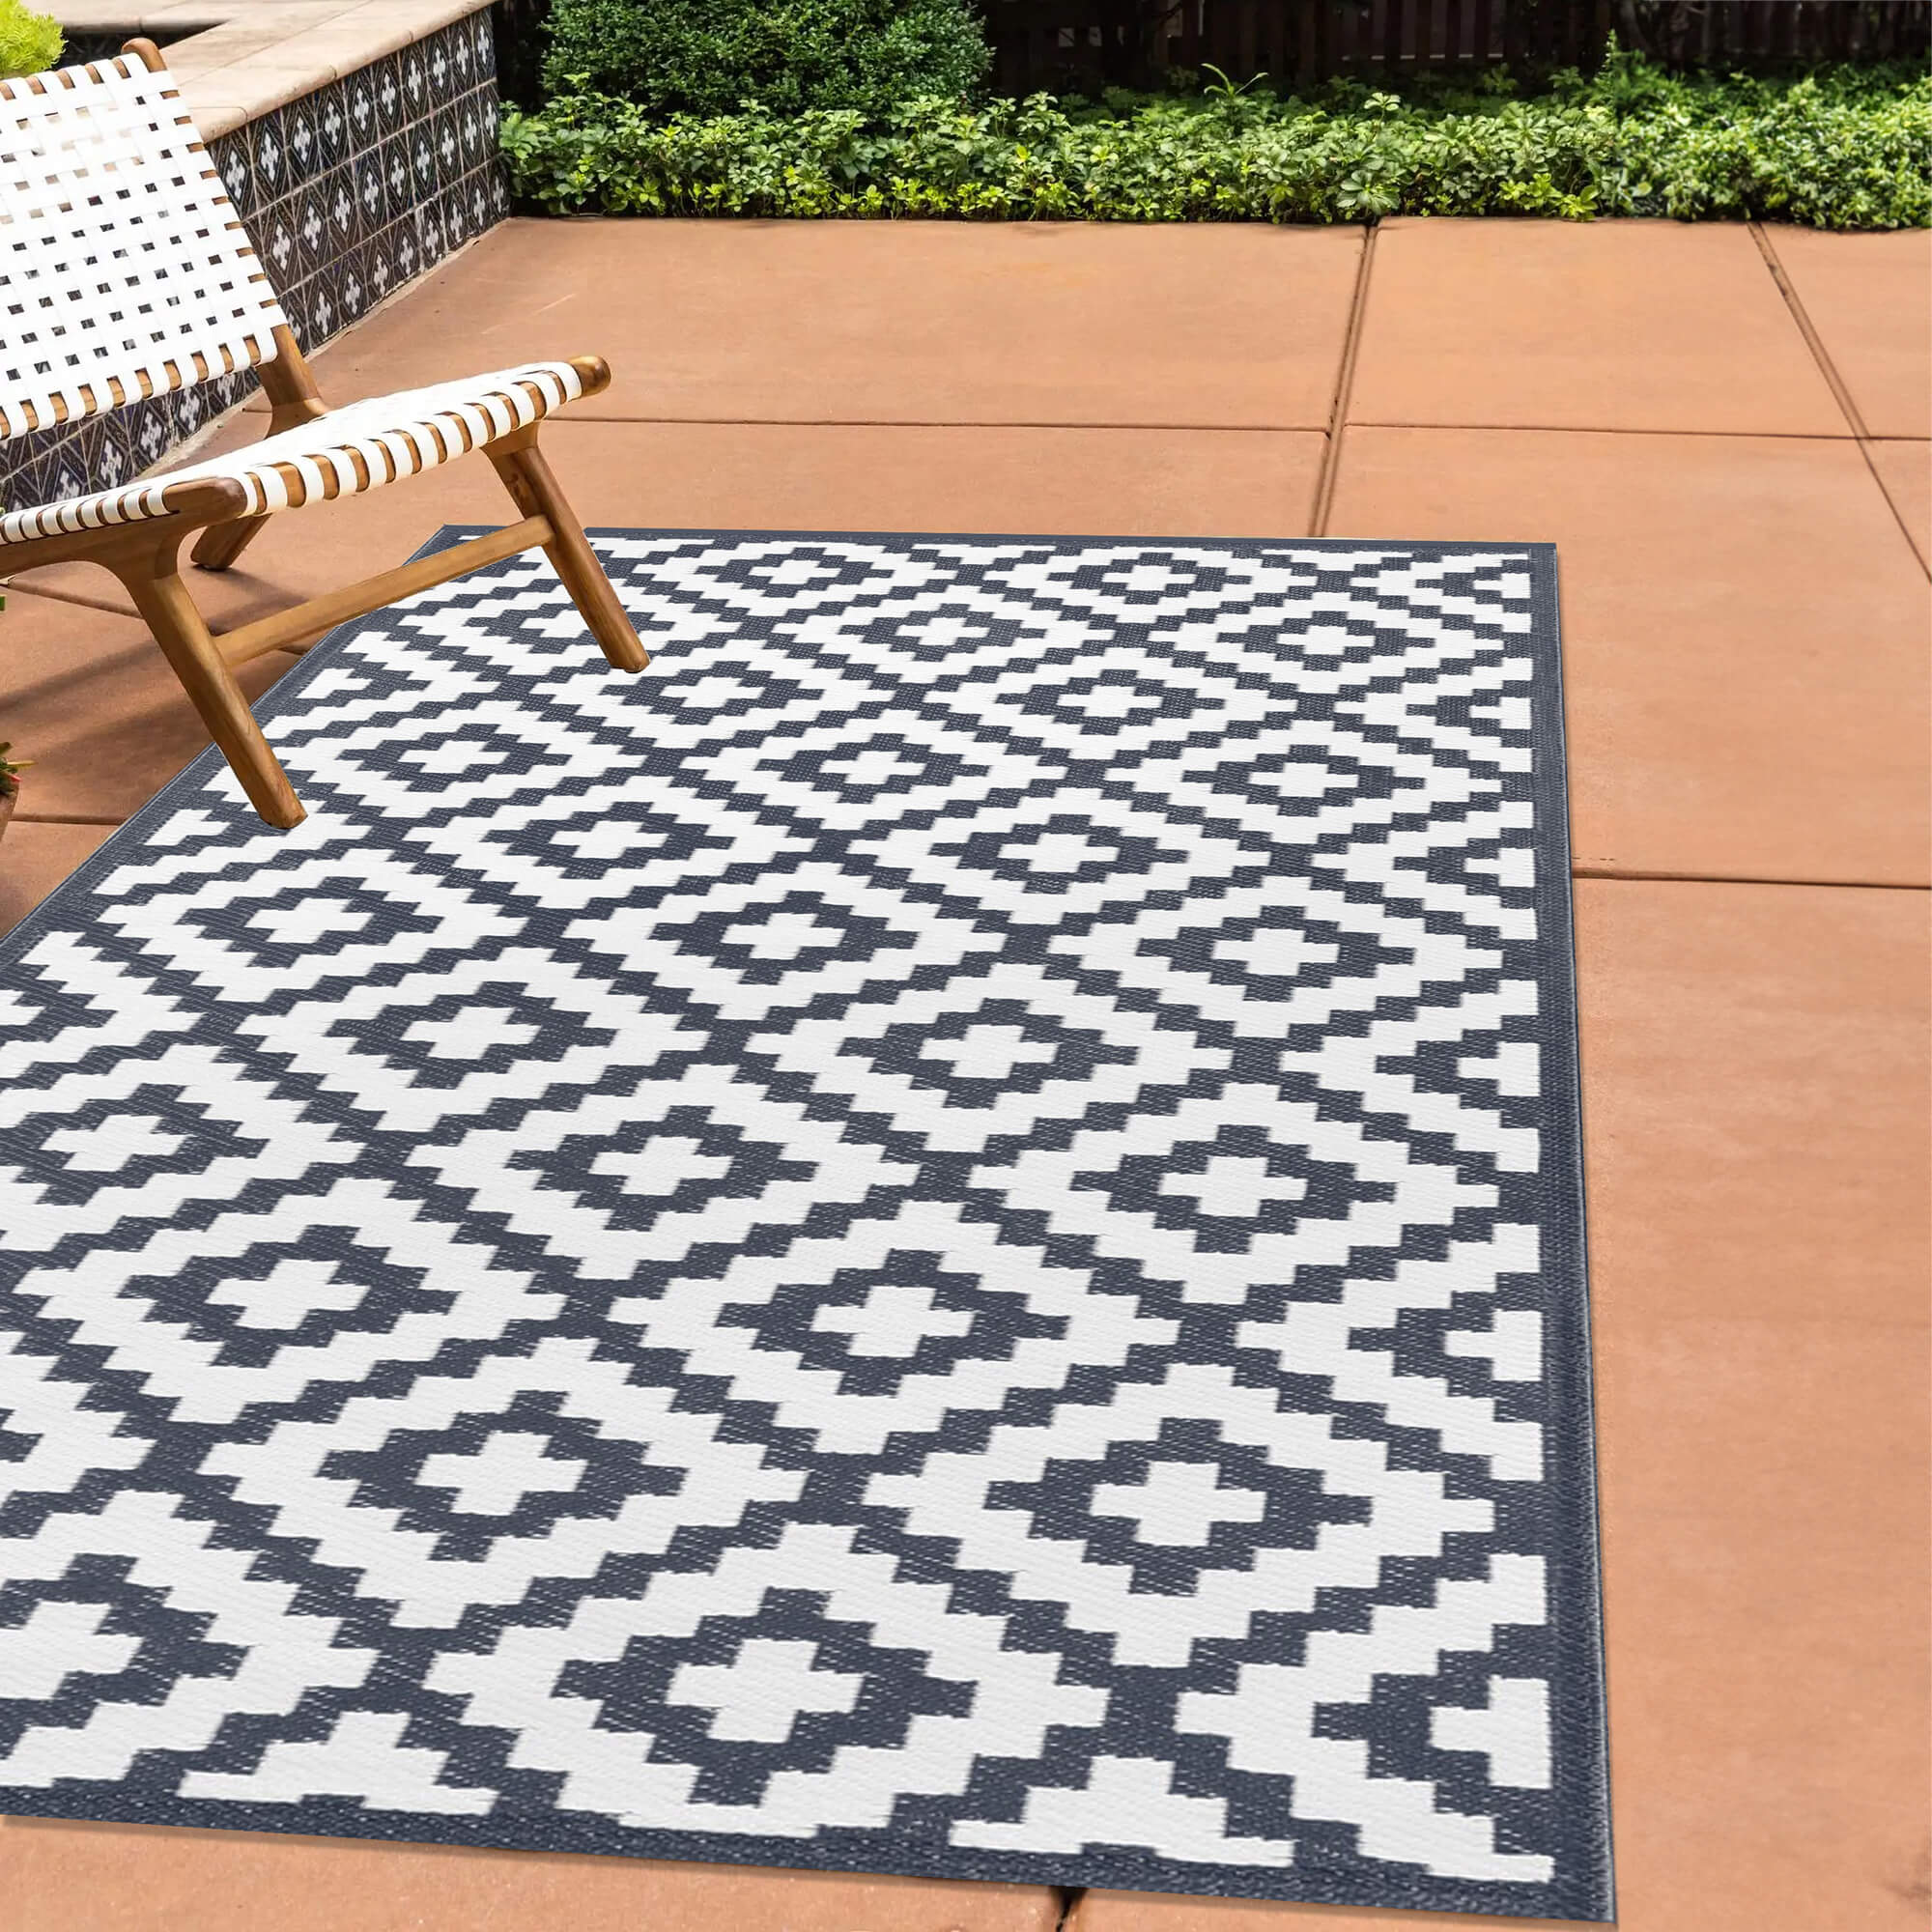 Nirvana Outdoor Recycled Plastic Rug (Charcoal Grey/White)